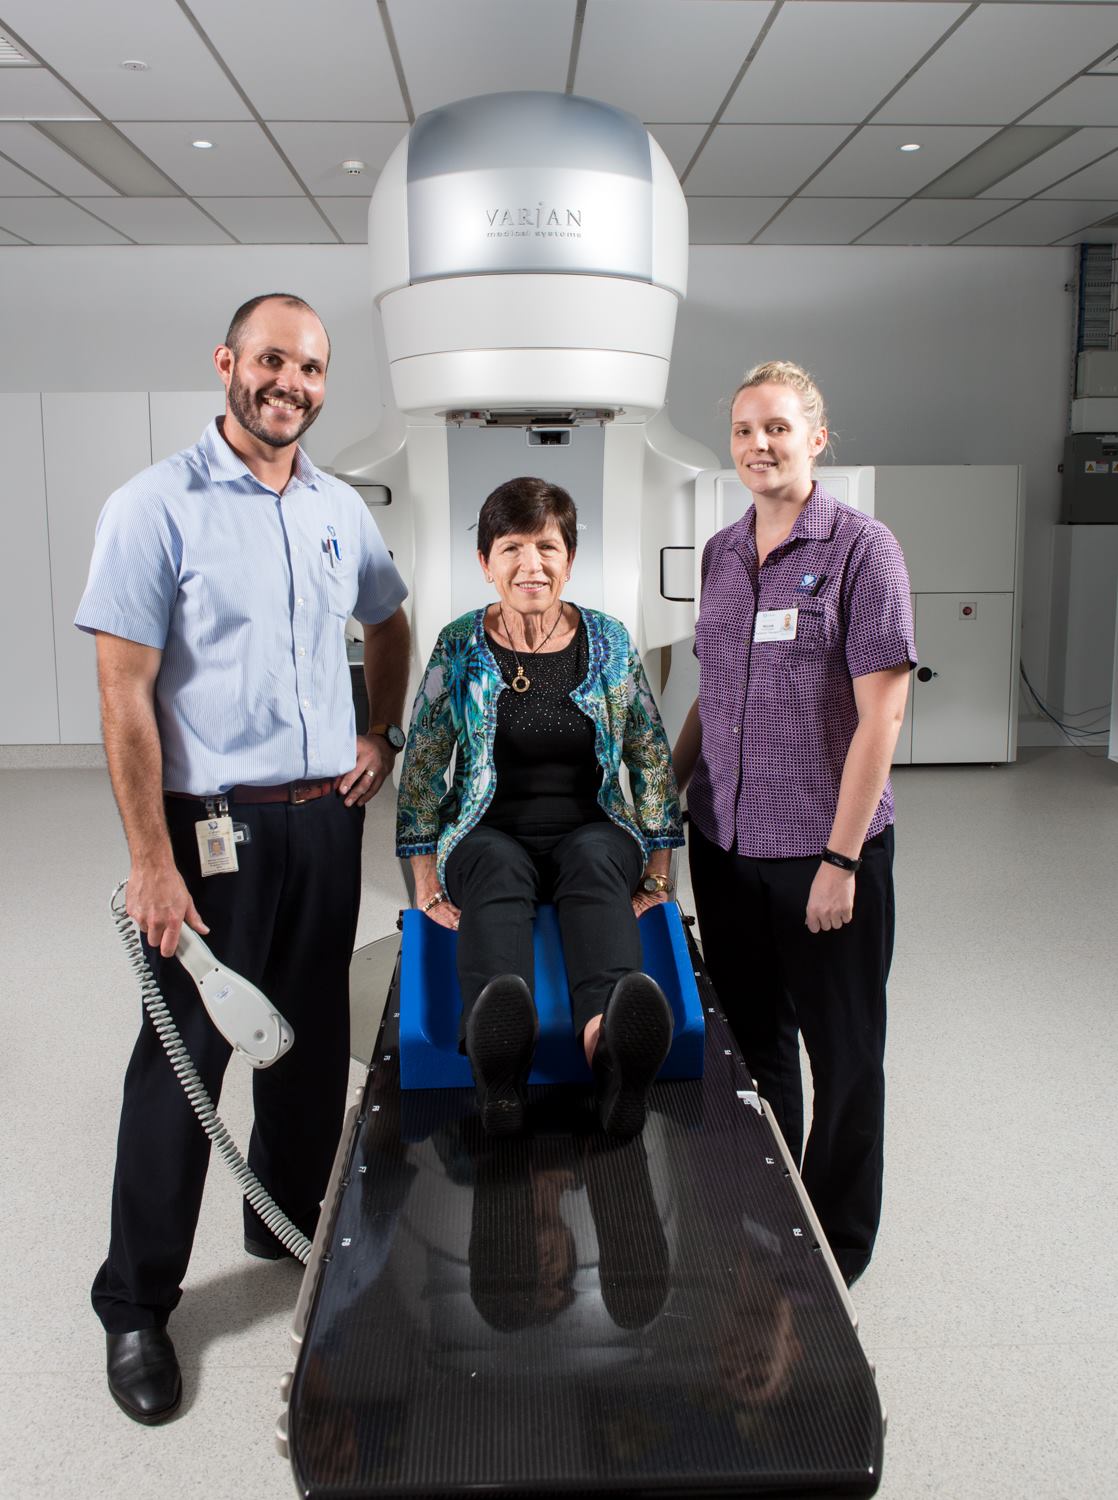 radiation medicine trials, Our Research, TROG Cancer Research